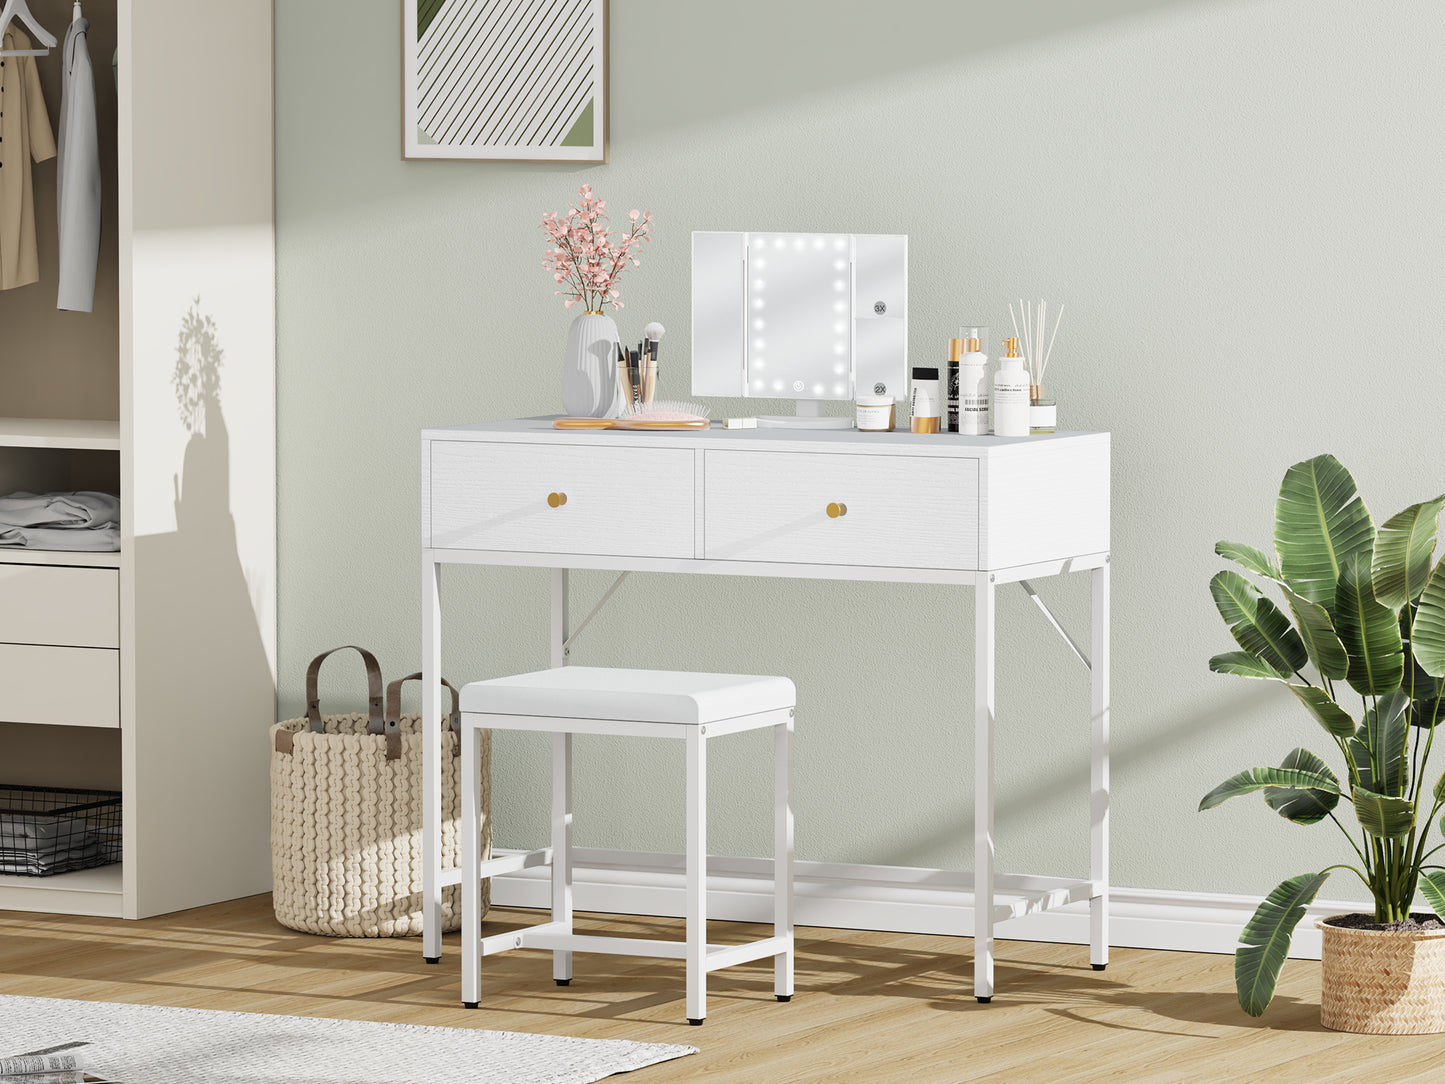 SUPERJARE Vanity Desk, Makeup Vanity with Stool & Tri-fold Lighted Mirror, Vanity Table Set with 2 Large Drawers - White, 7931W